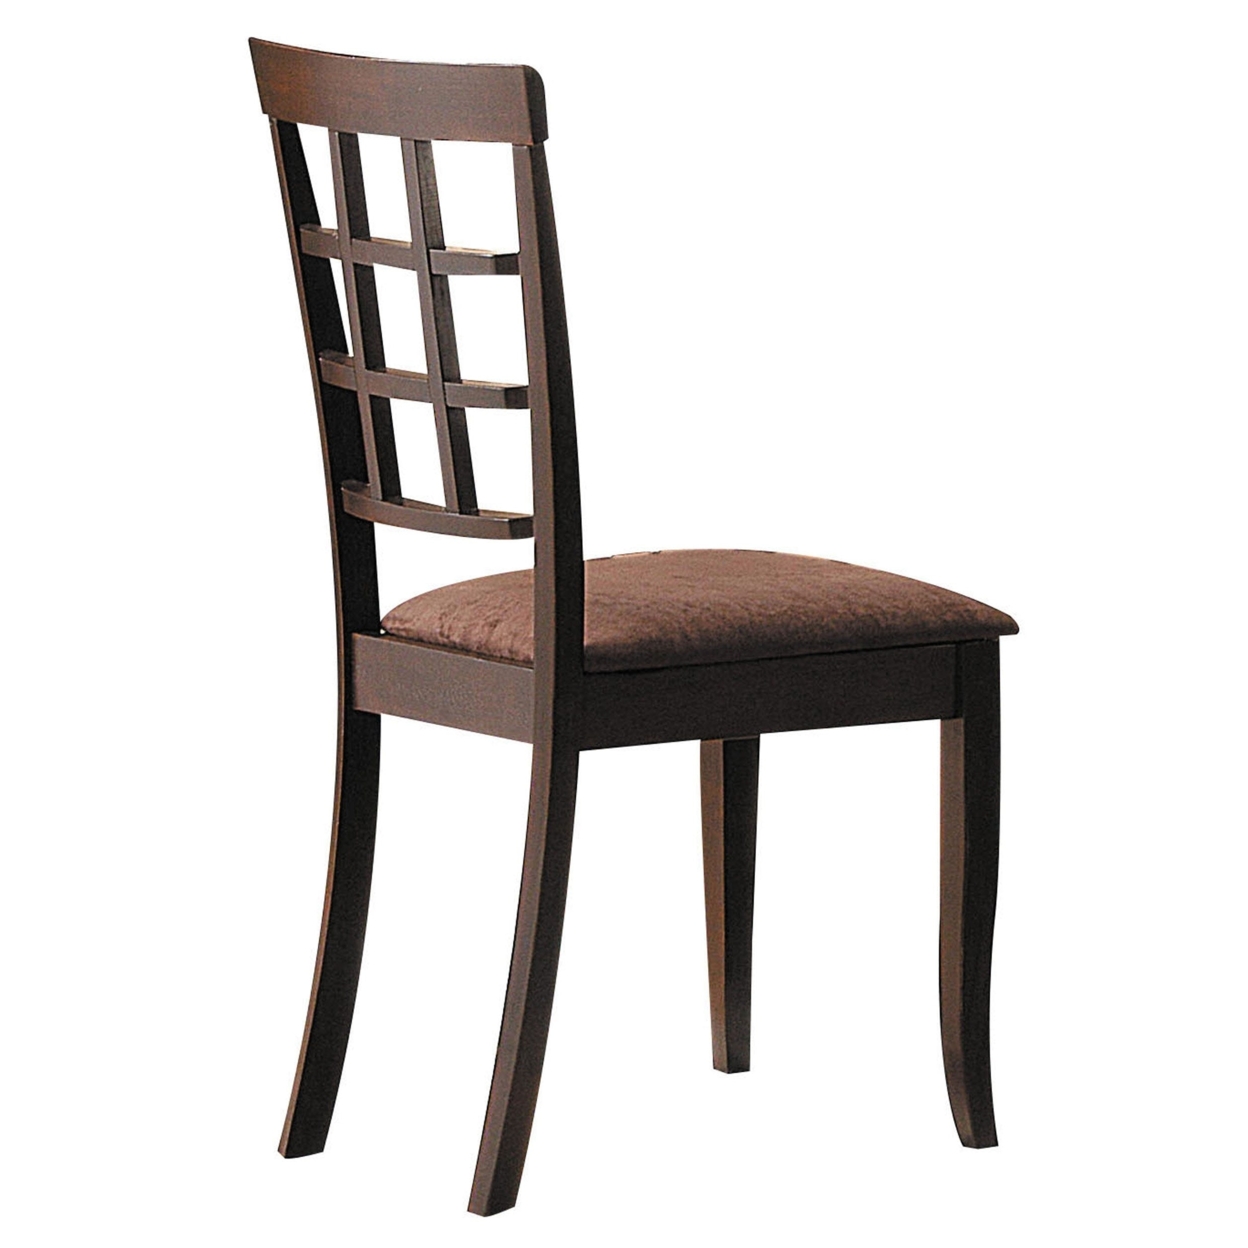 Wood & Fabric Side Chairs With Open Grid Pattern Back, Espresso Brown, Set Of 2- Saltoro Sherpi